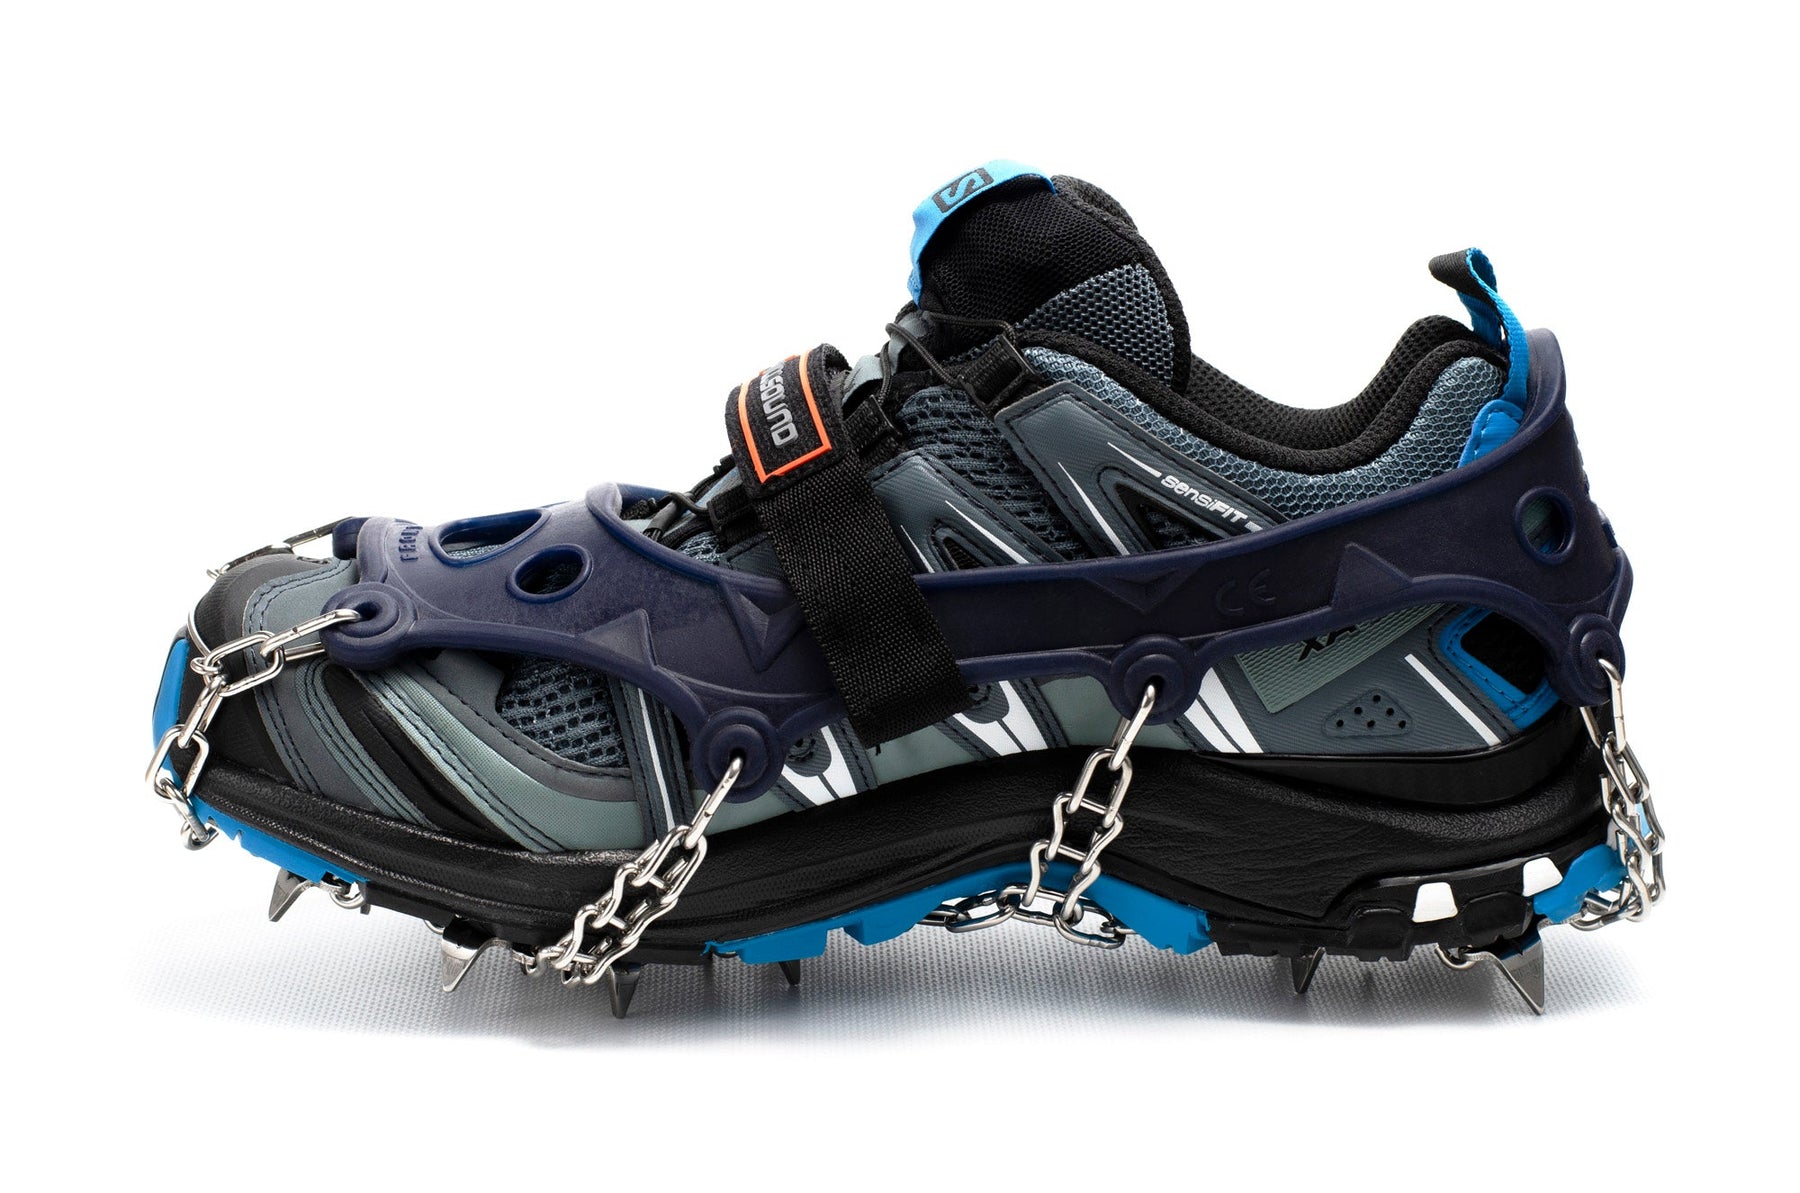 Hillsound Trail Crampon Ultra Traction Device, XS